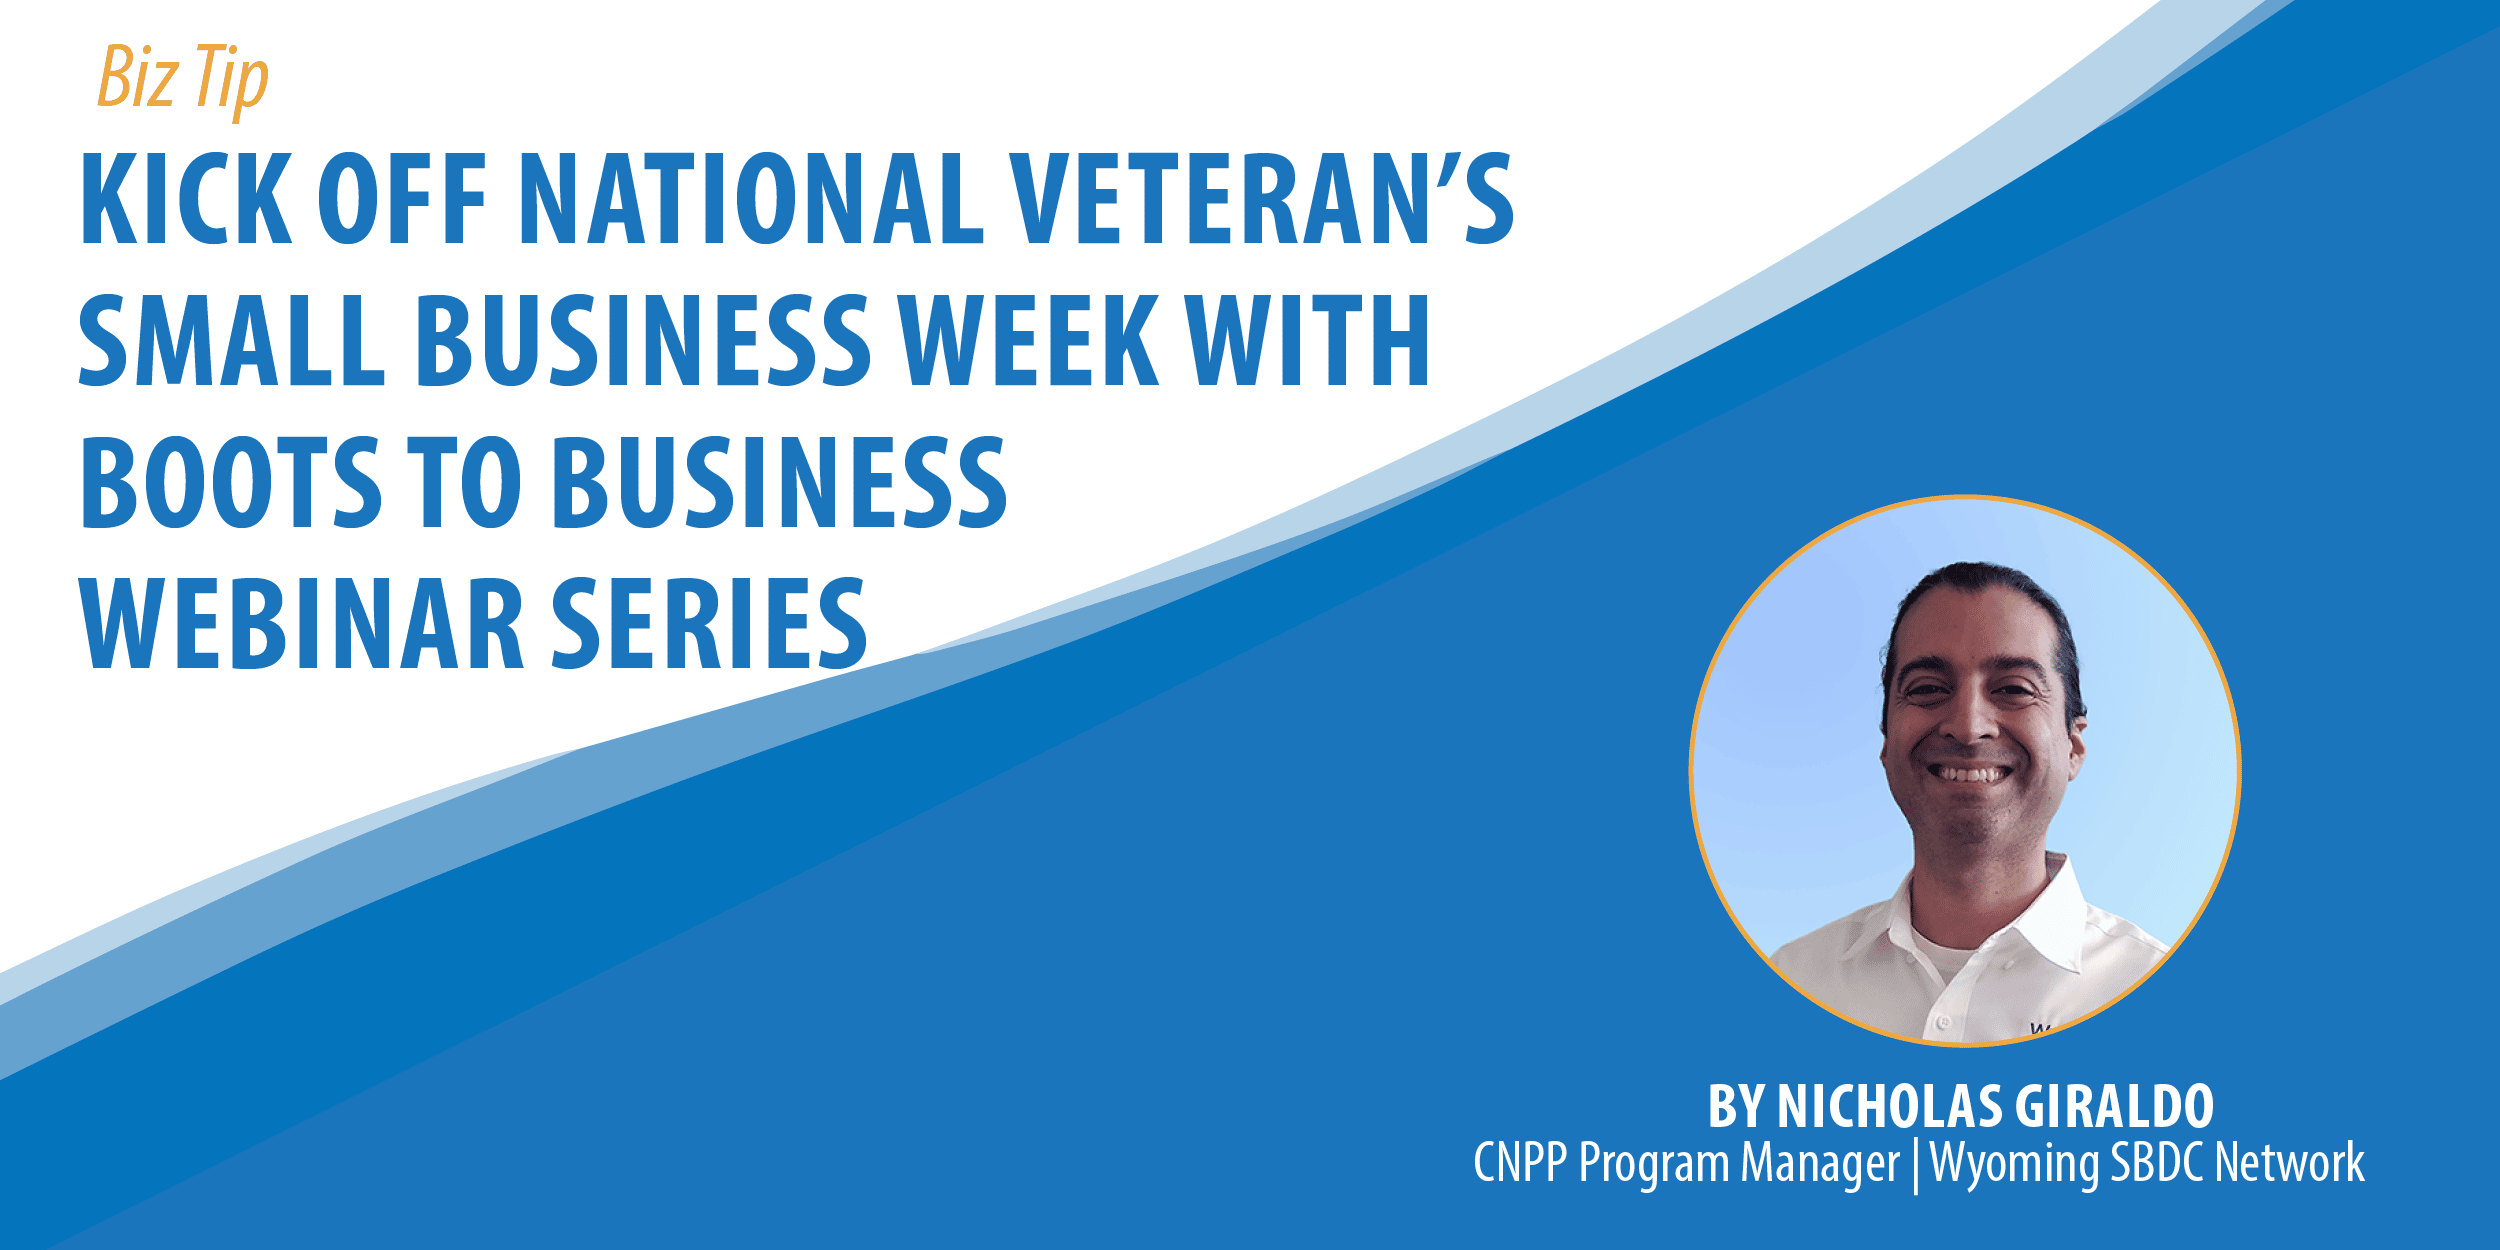 Kick Off National Veteran’s Small Business Week with Boots to Business Webinar Series